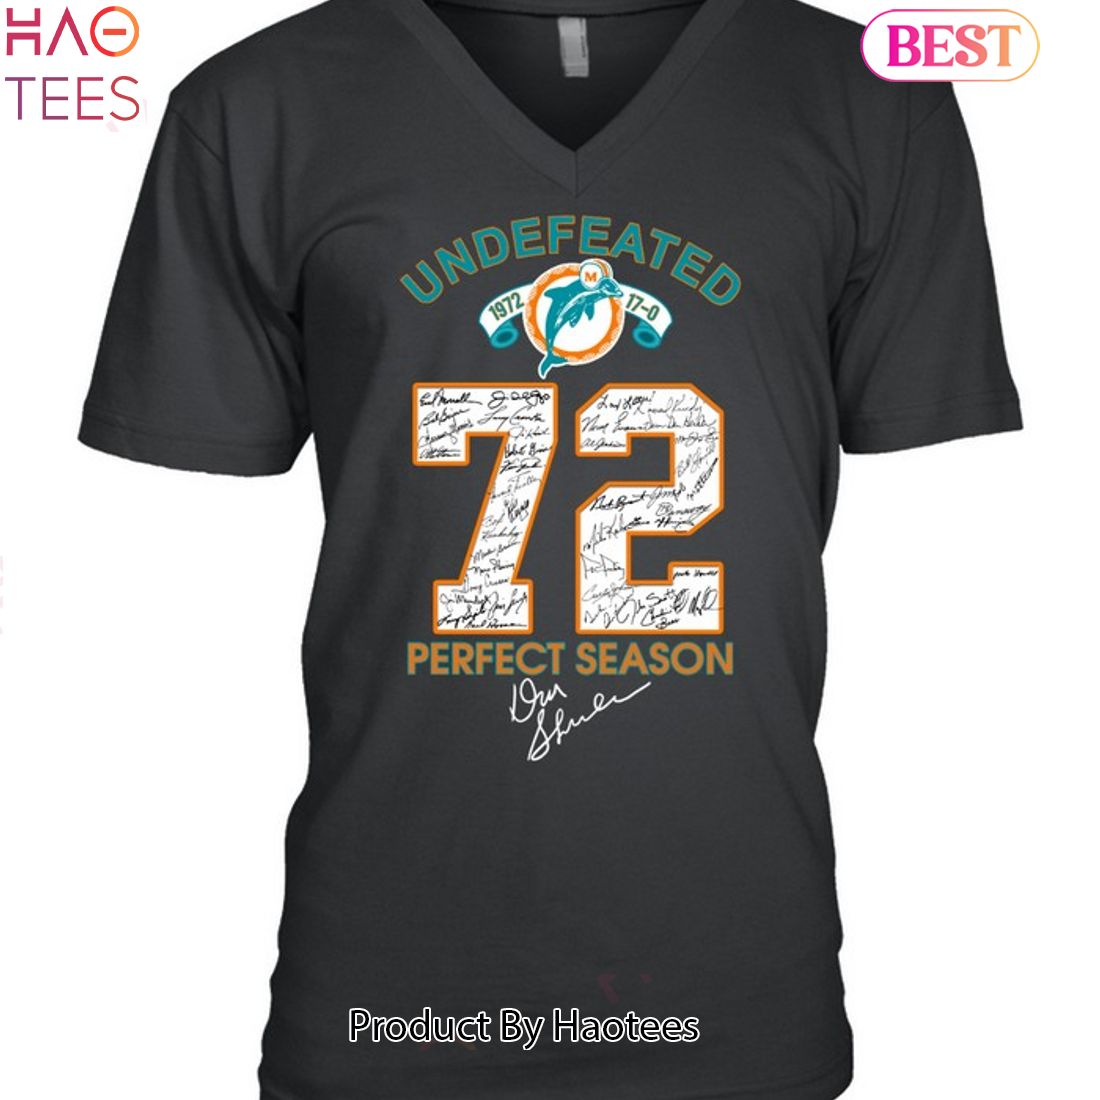 Miami Dolphins Undefeated 1972 Perfect Season Unisex T-Shirt